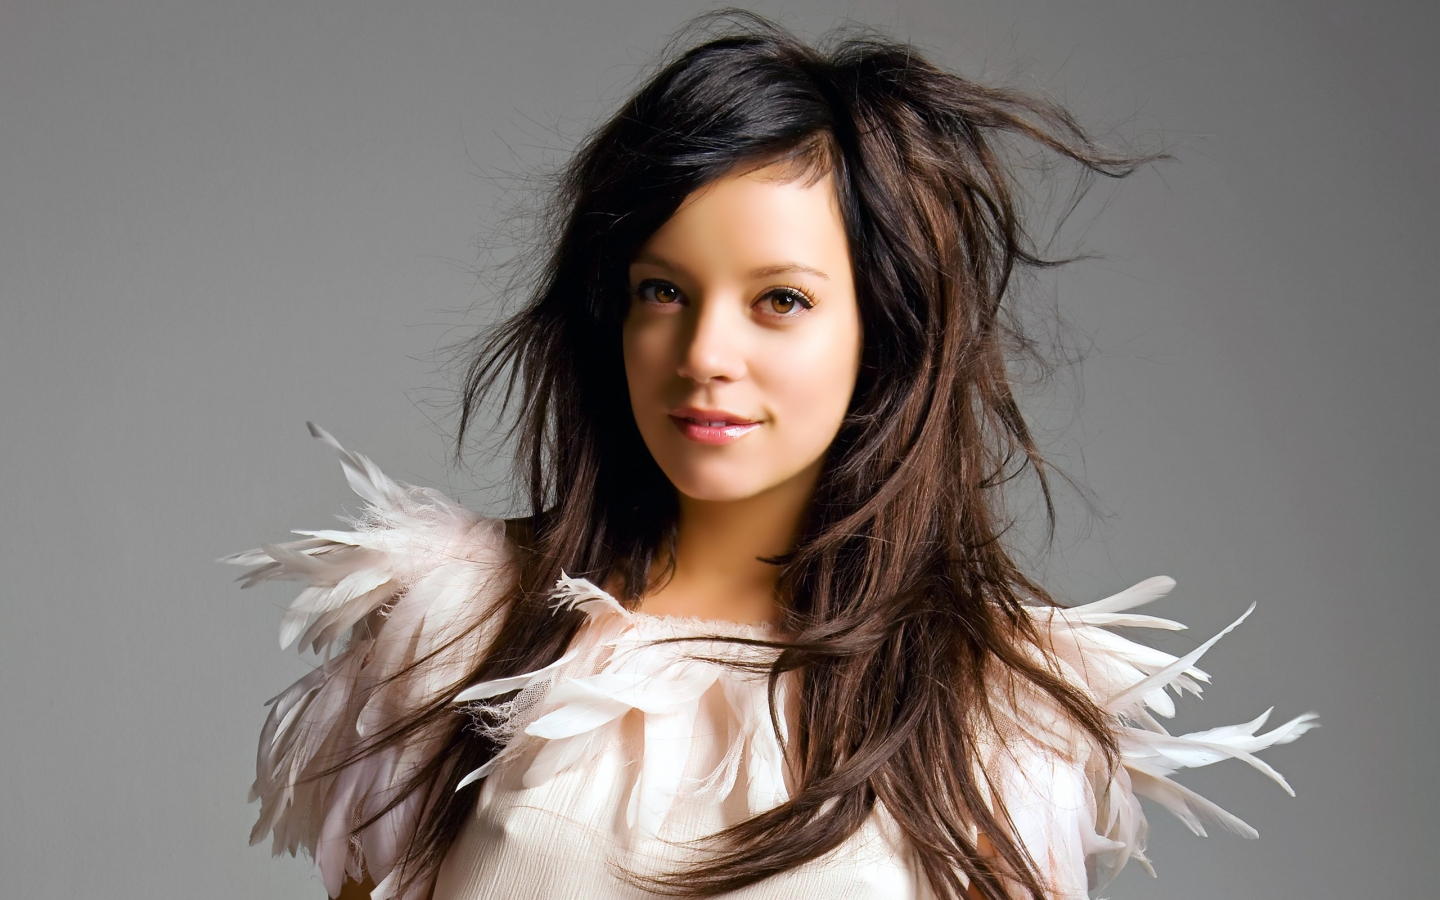 Superb Lily Allen for 1440 x 900 widescreen resolution